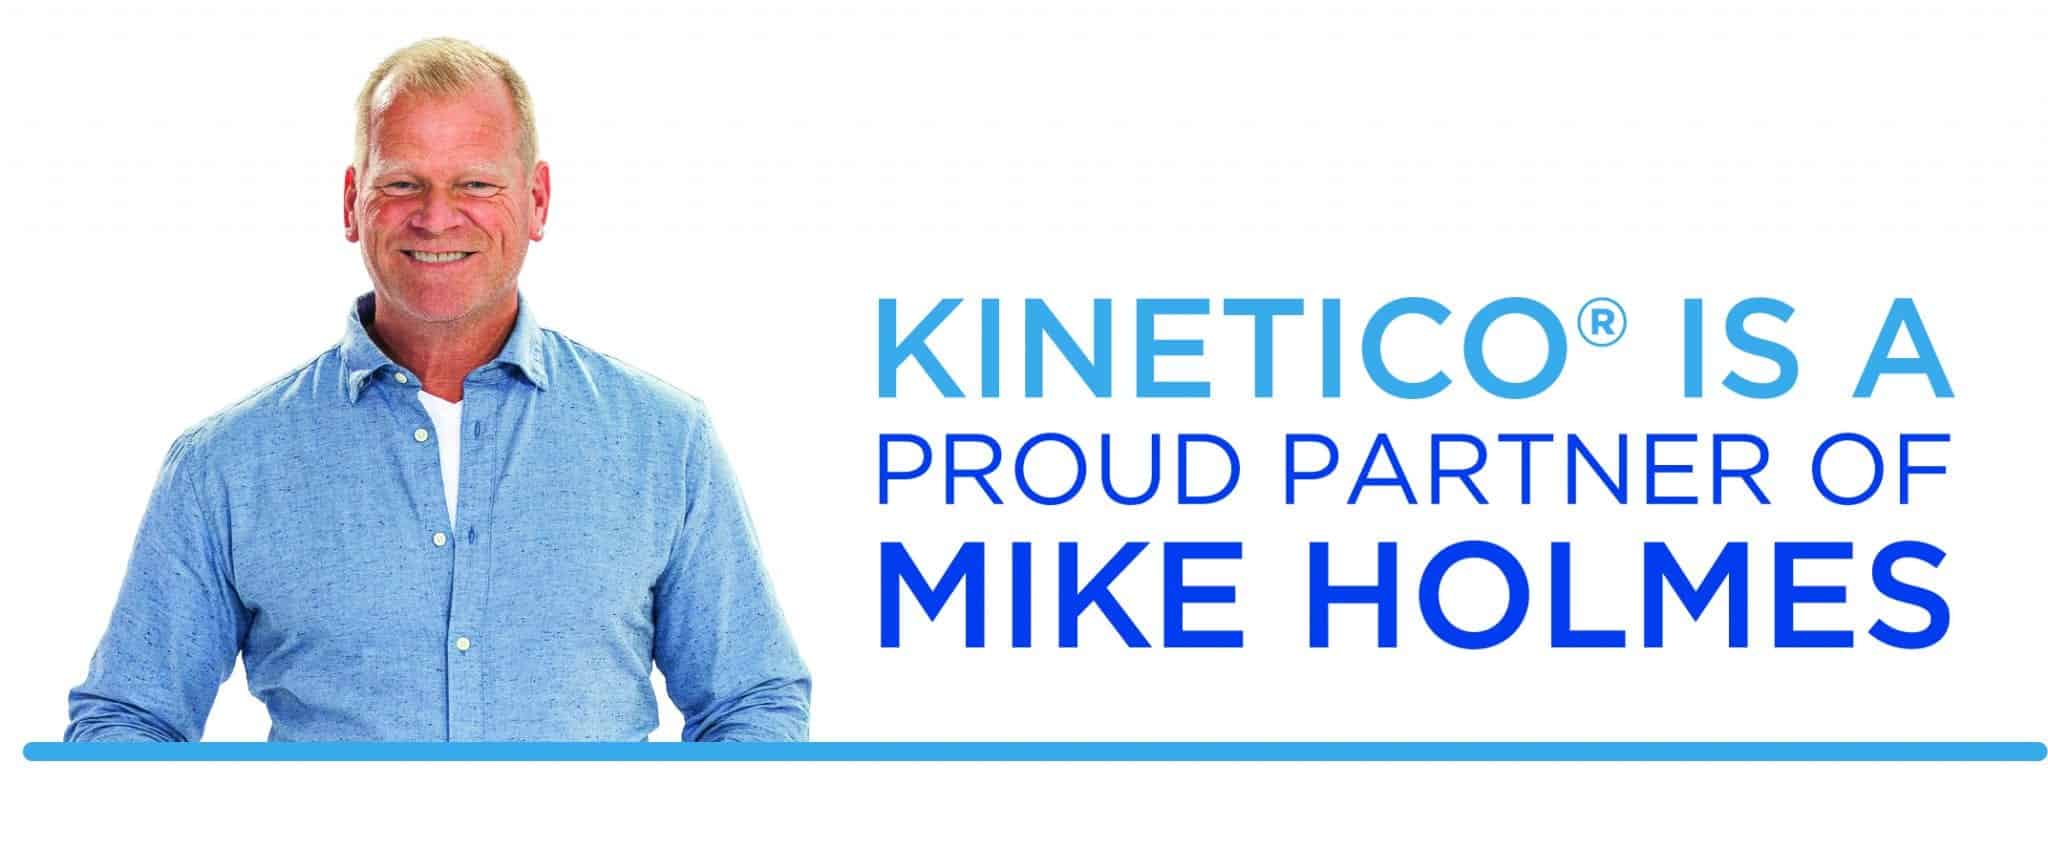 Picture of Mike Homes with Kinetico is a Proud Partner of Mike Homes